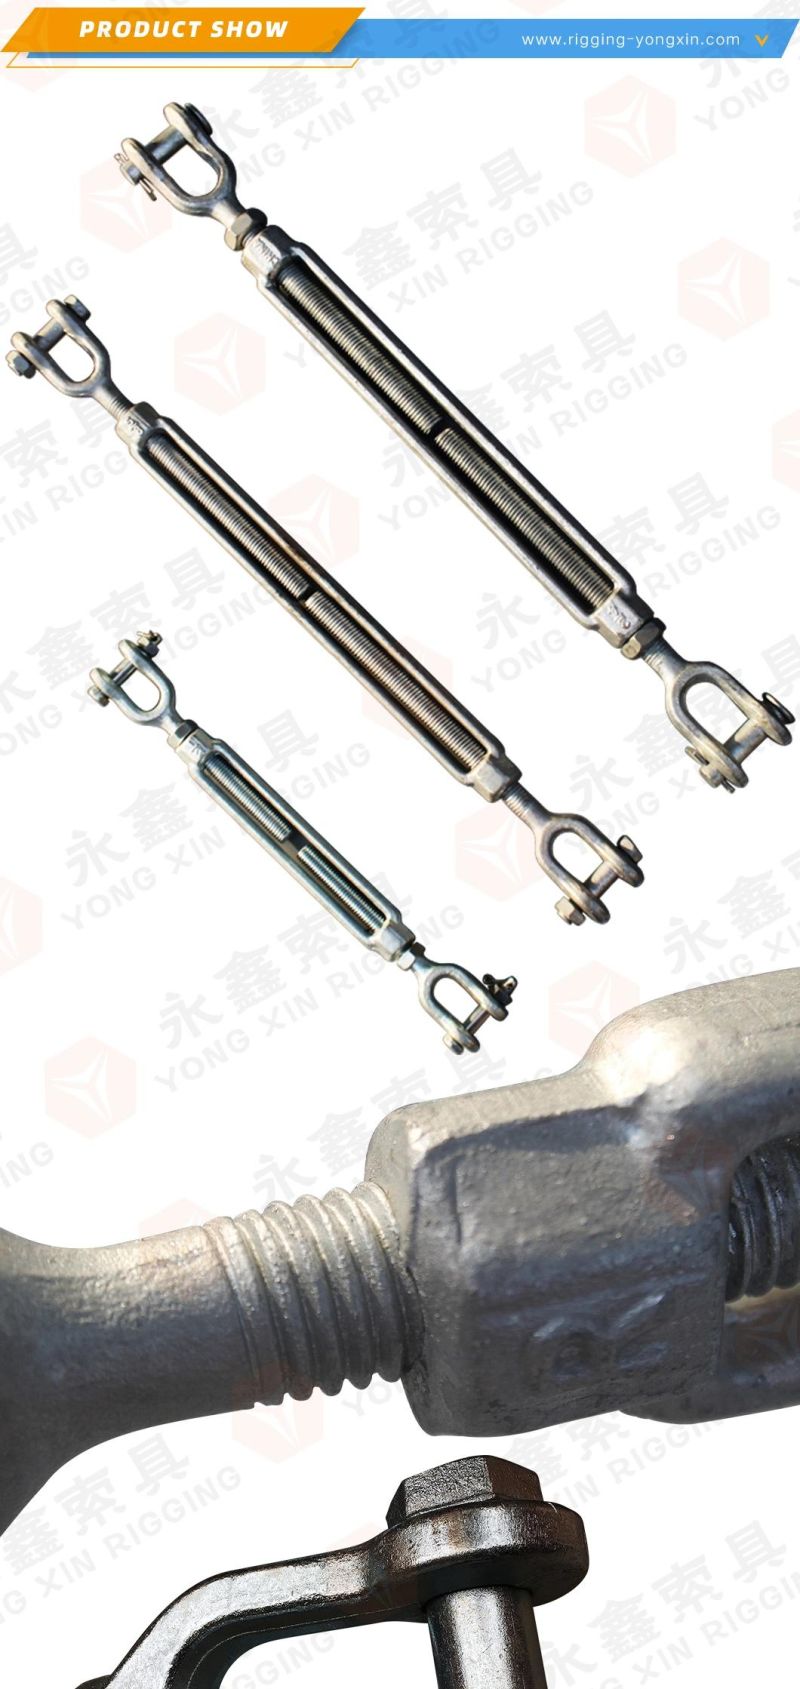 Jaw Turnbuckle Jaw Jaw Turnbuckle Hot DIP Galvanized Carbon Steel Us Standard Jaw and Jaw Type Turnbuckle